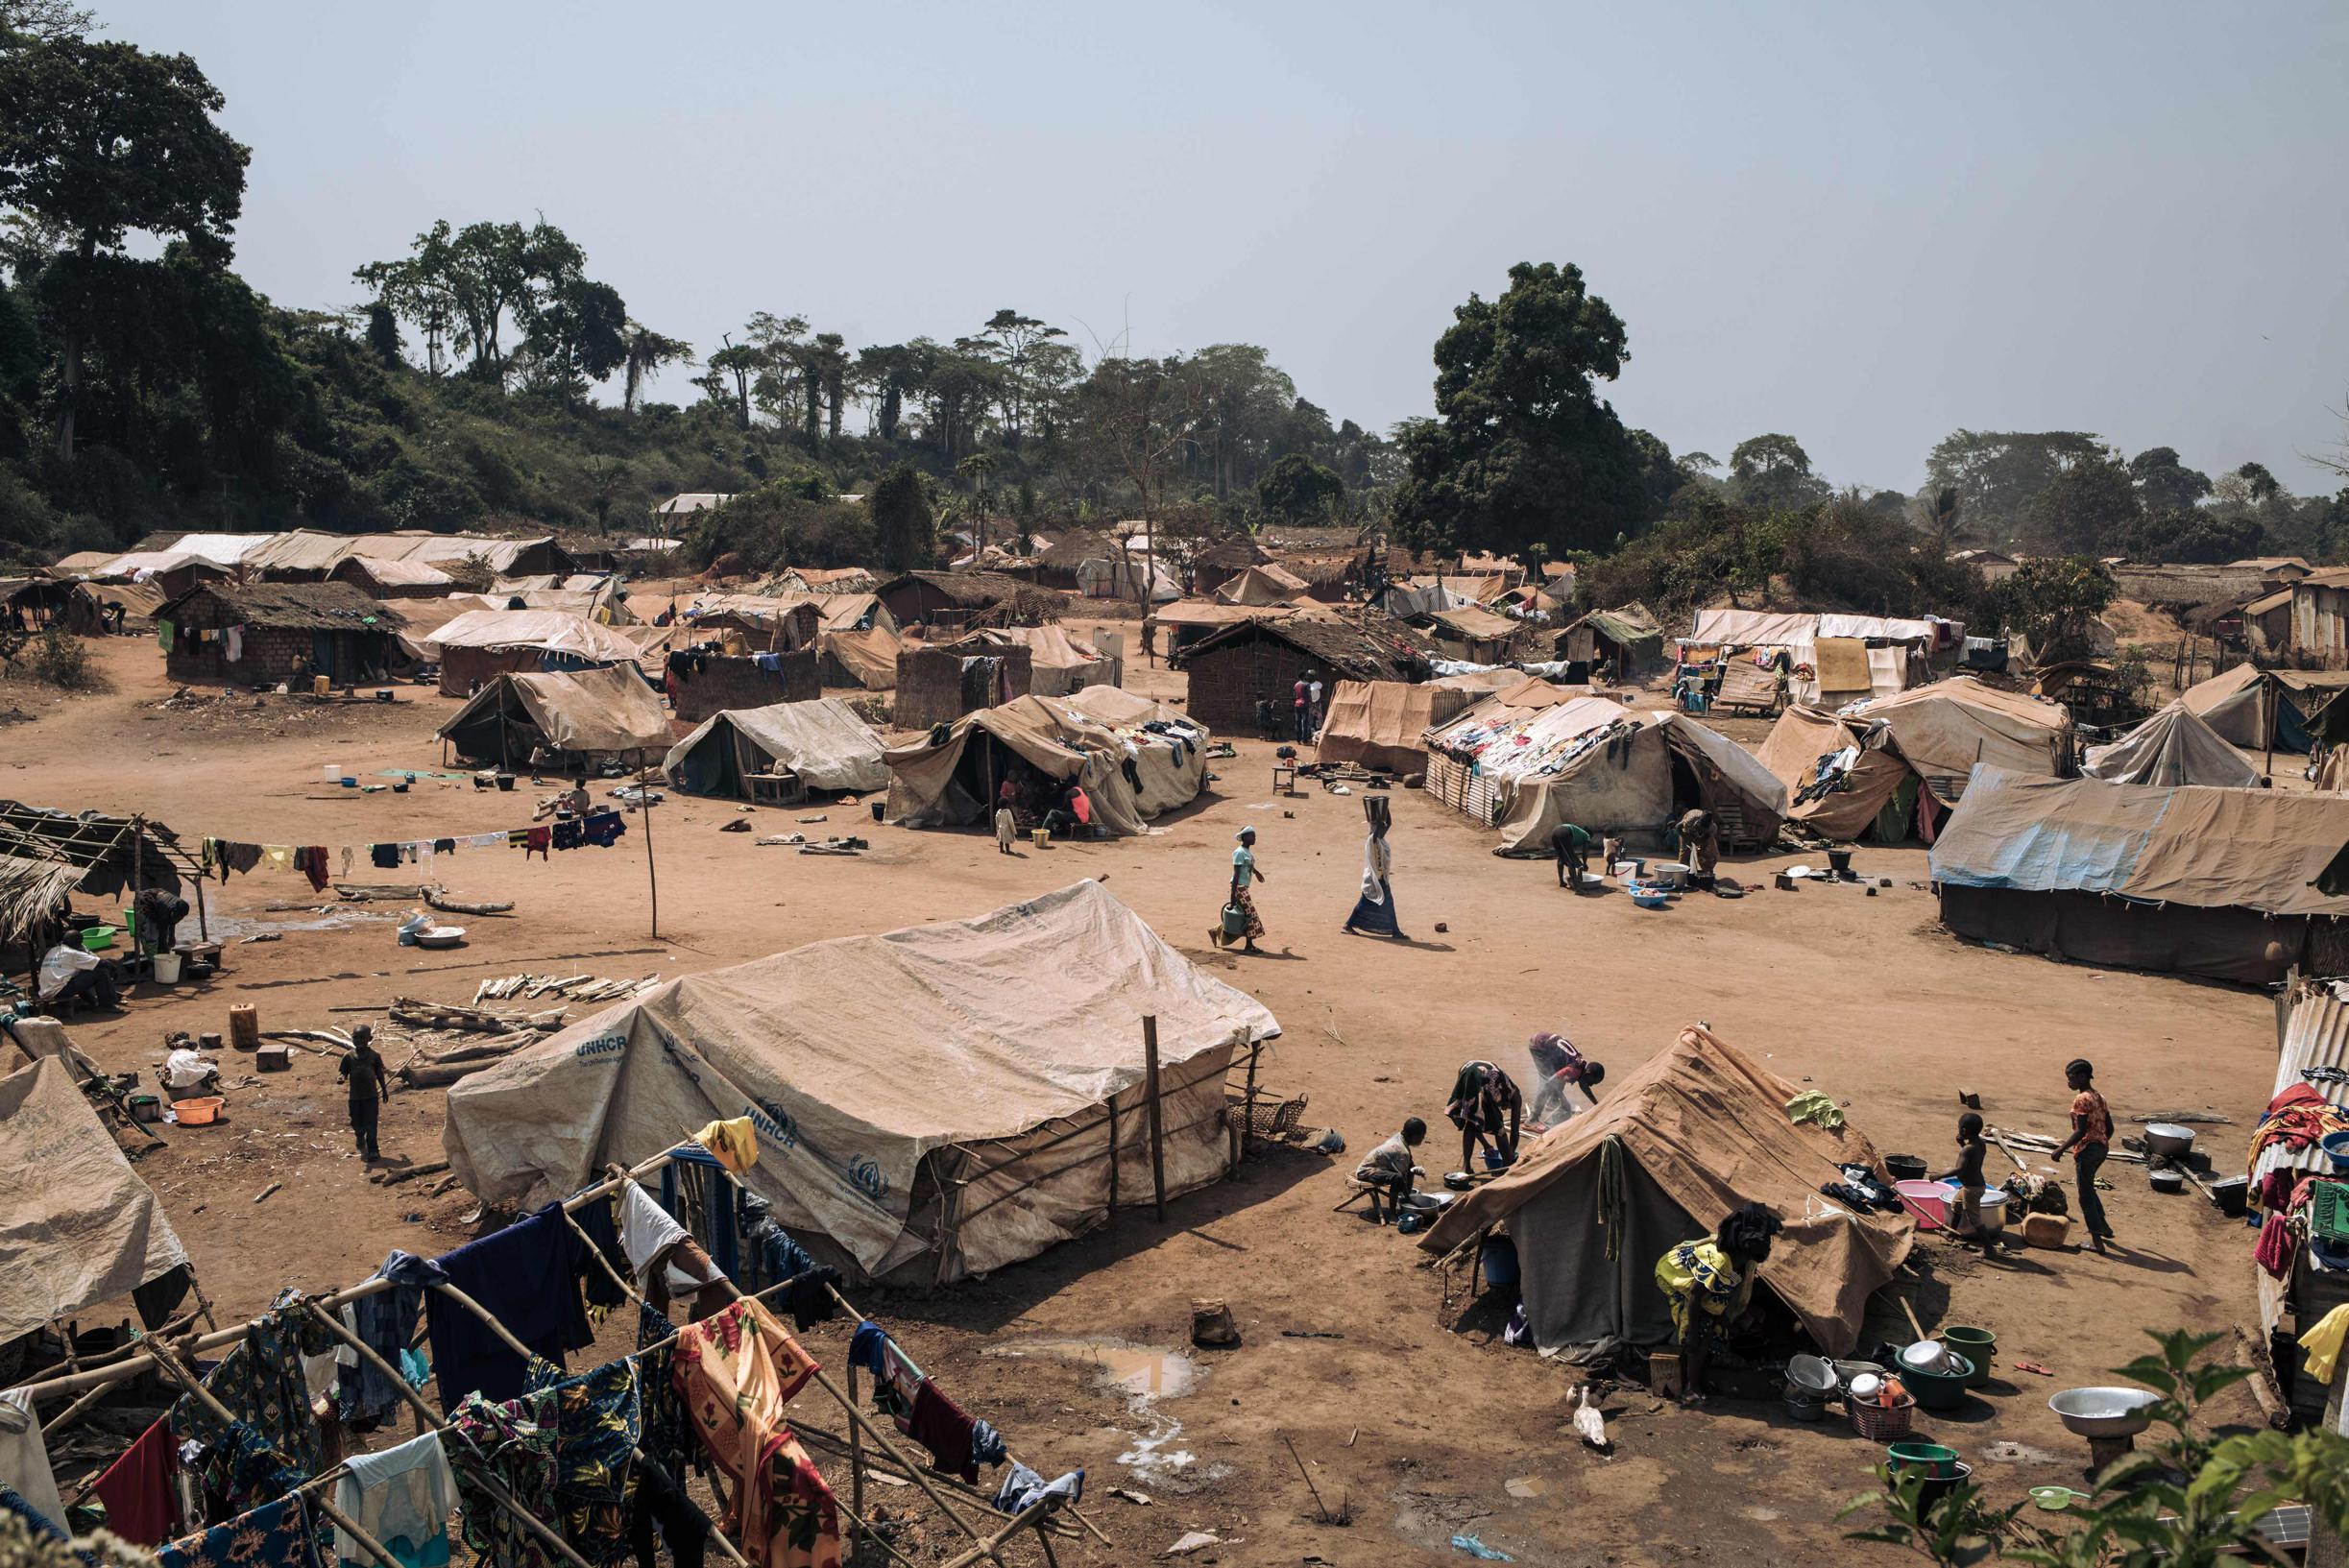 Central African Republic faces “unseen” humanitarian needs, according to UN